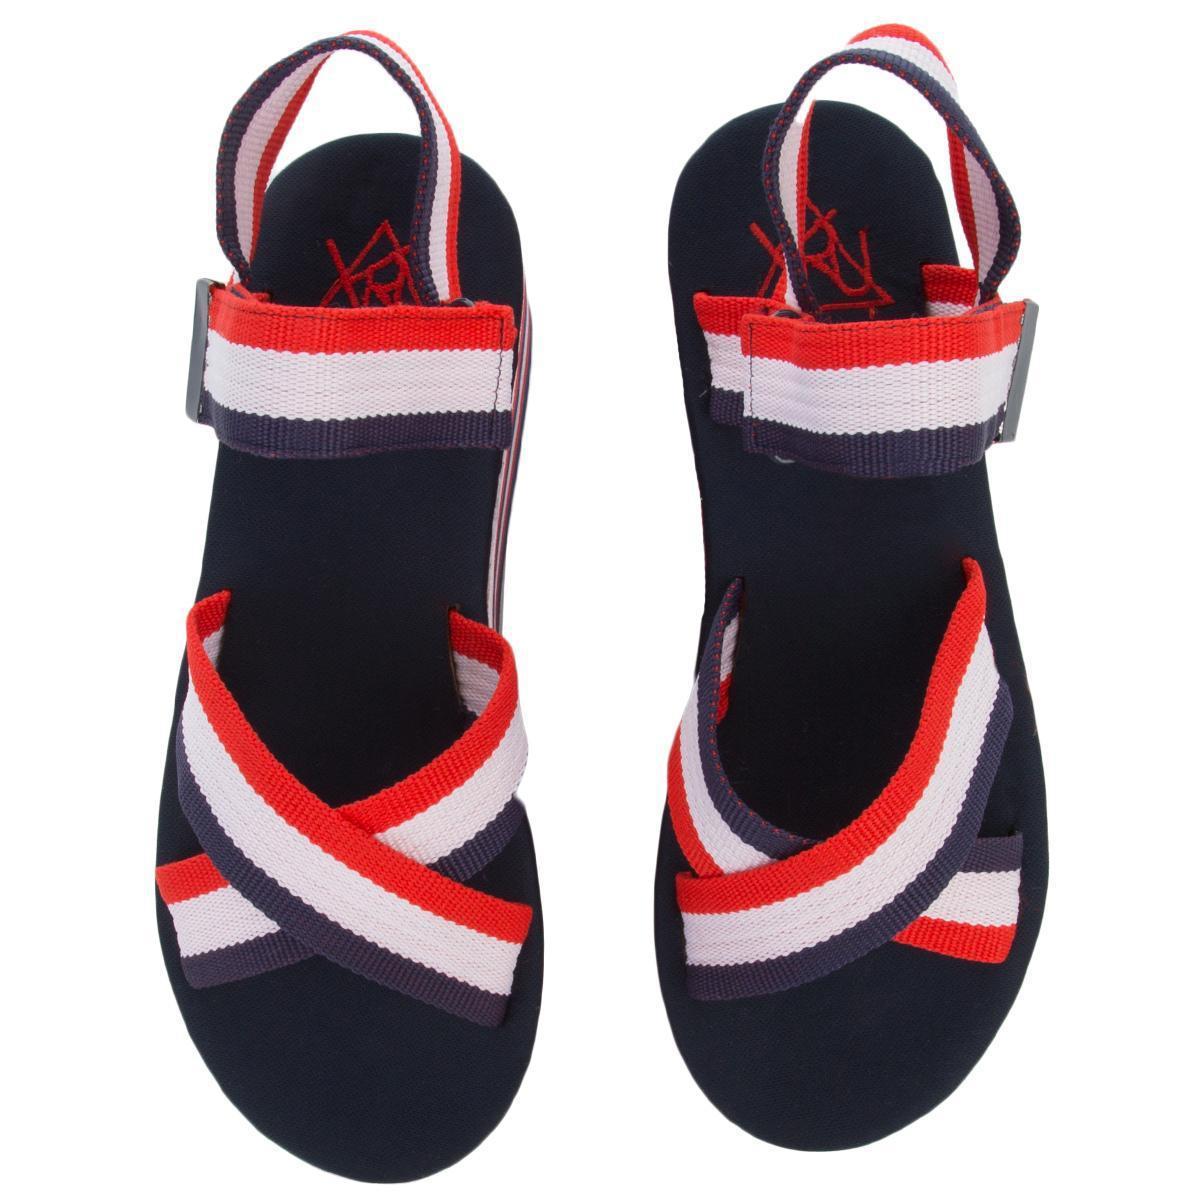 red white and blue platform sneakers